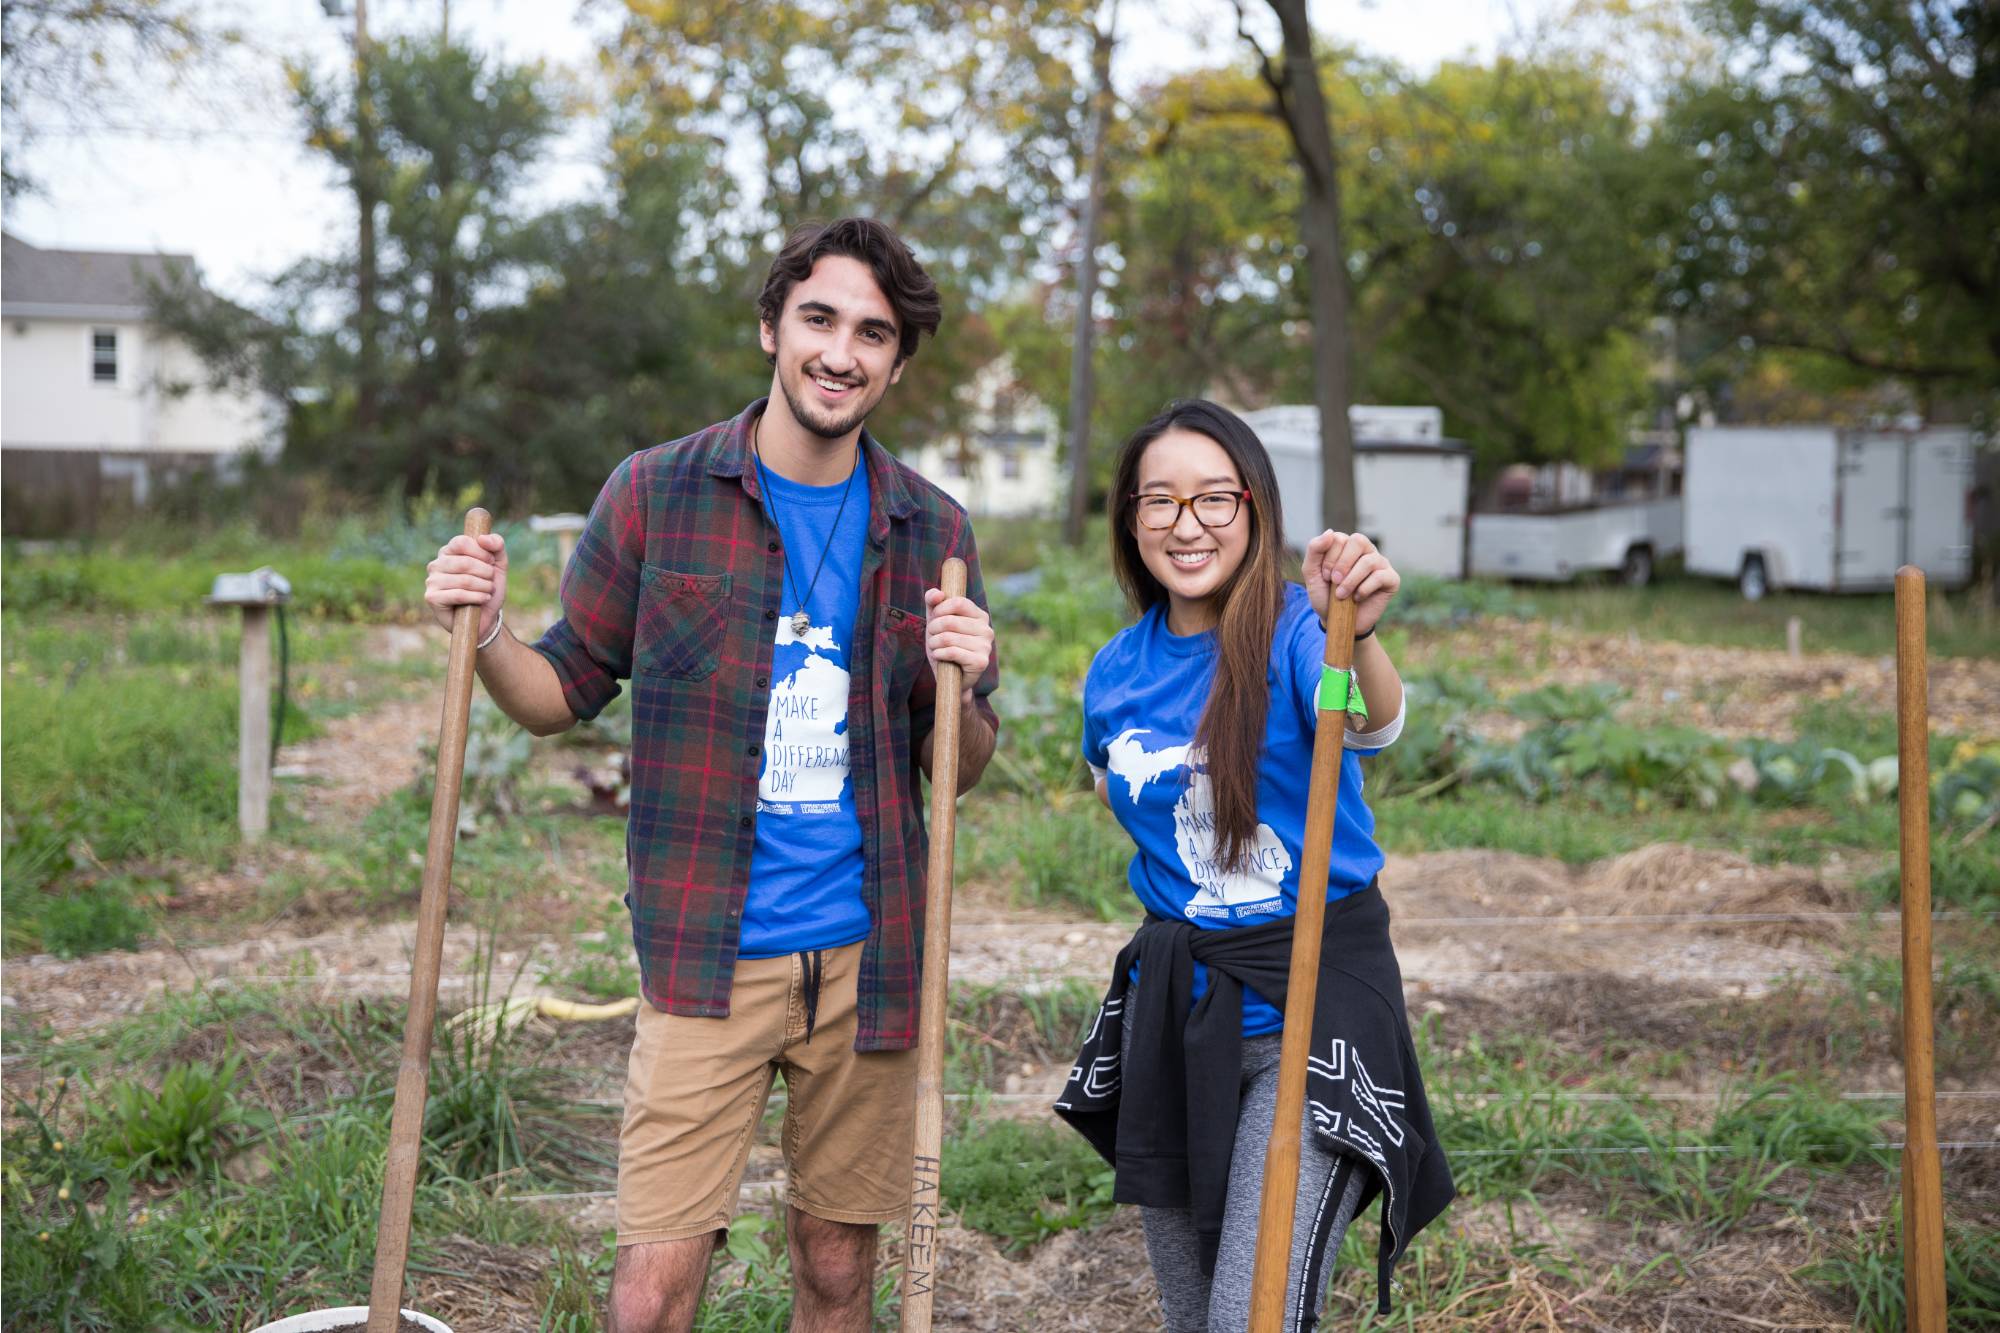 Two students smiling while holding shovels on a farm